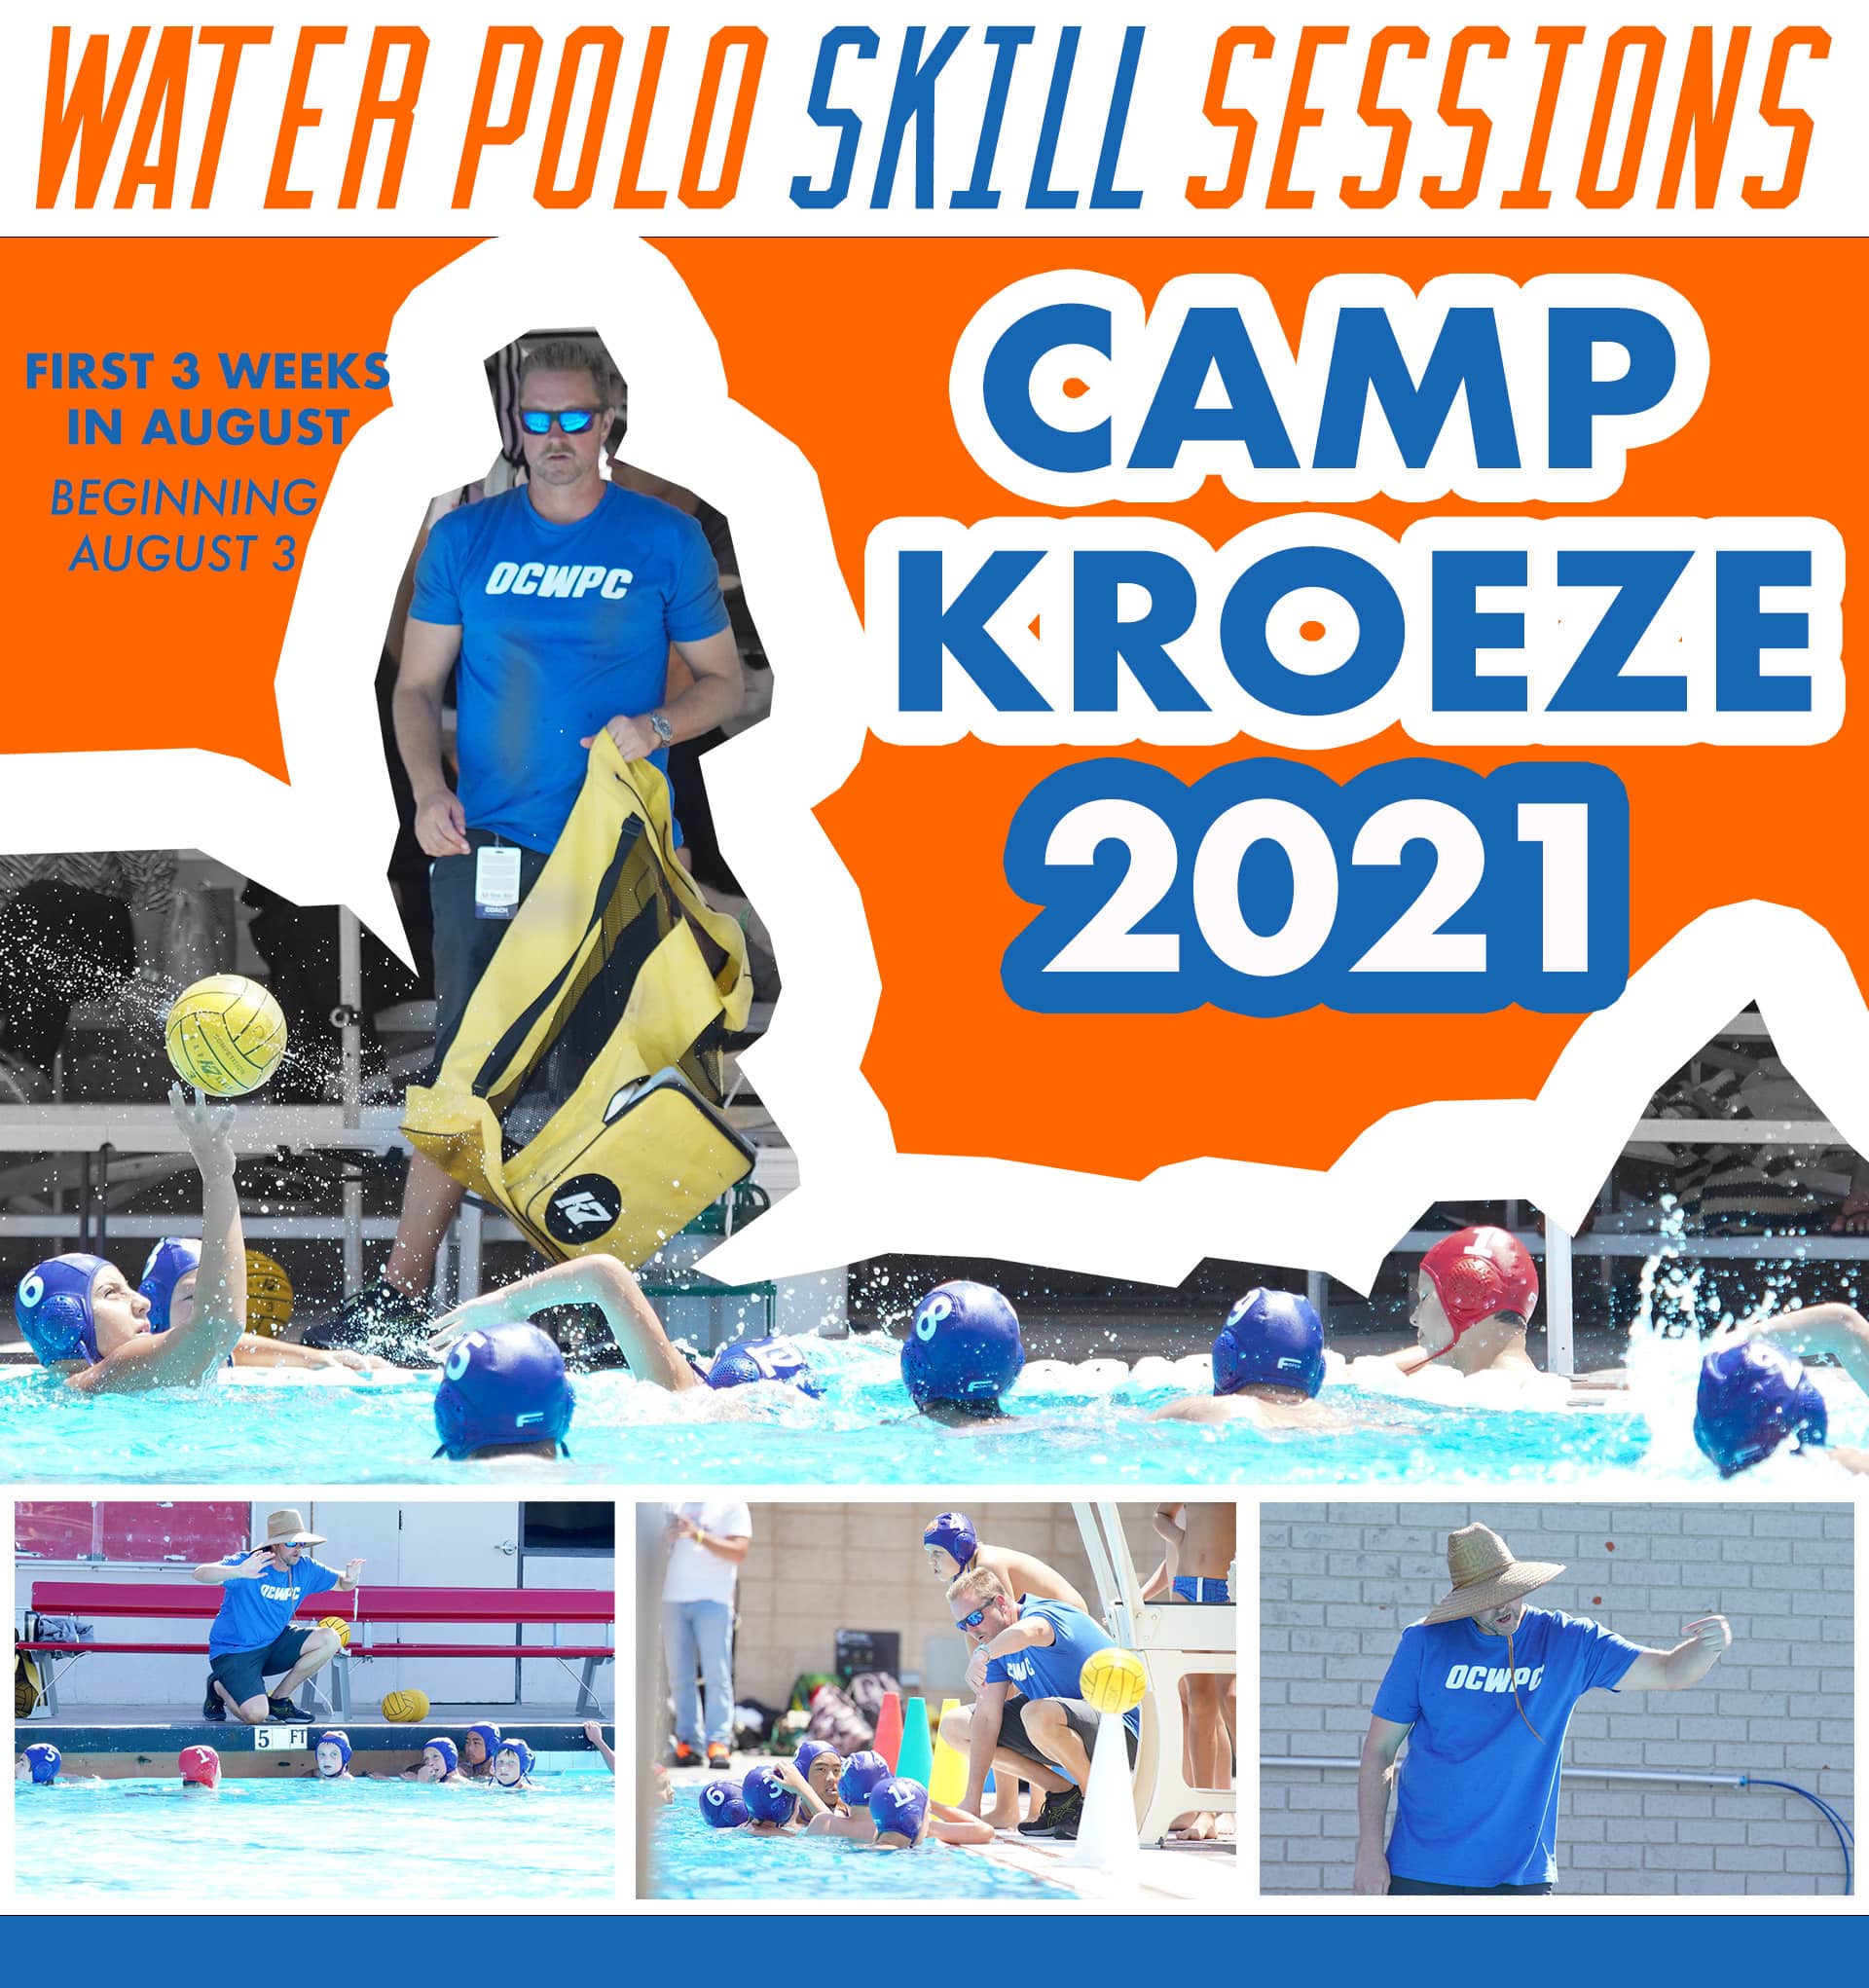 Camp Kroeze – Water Polo Skills Practices